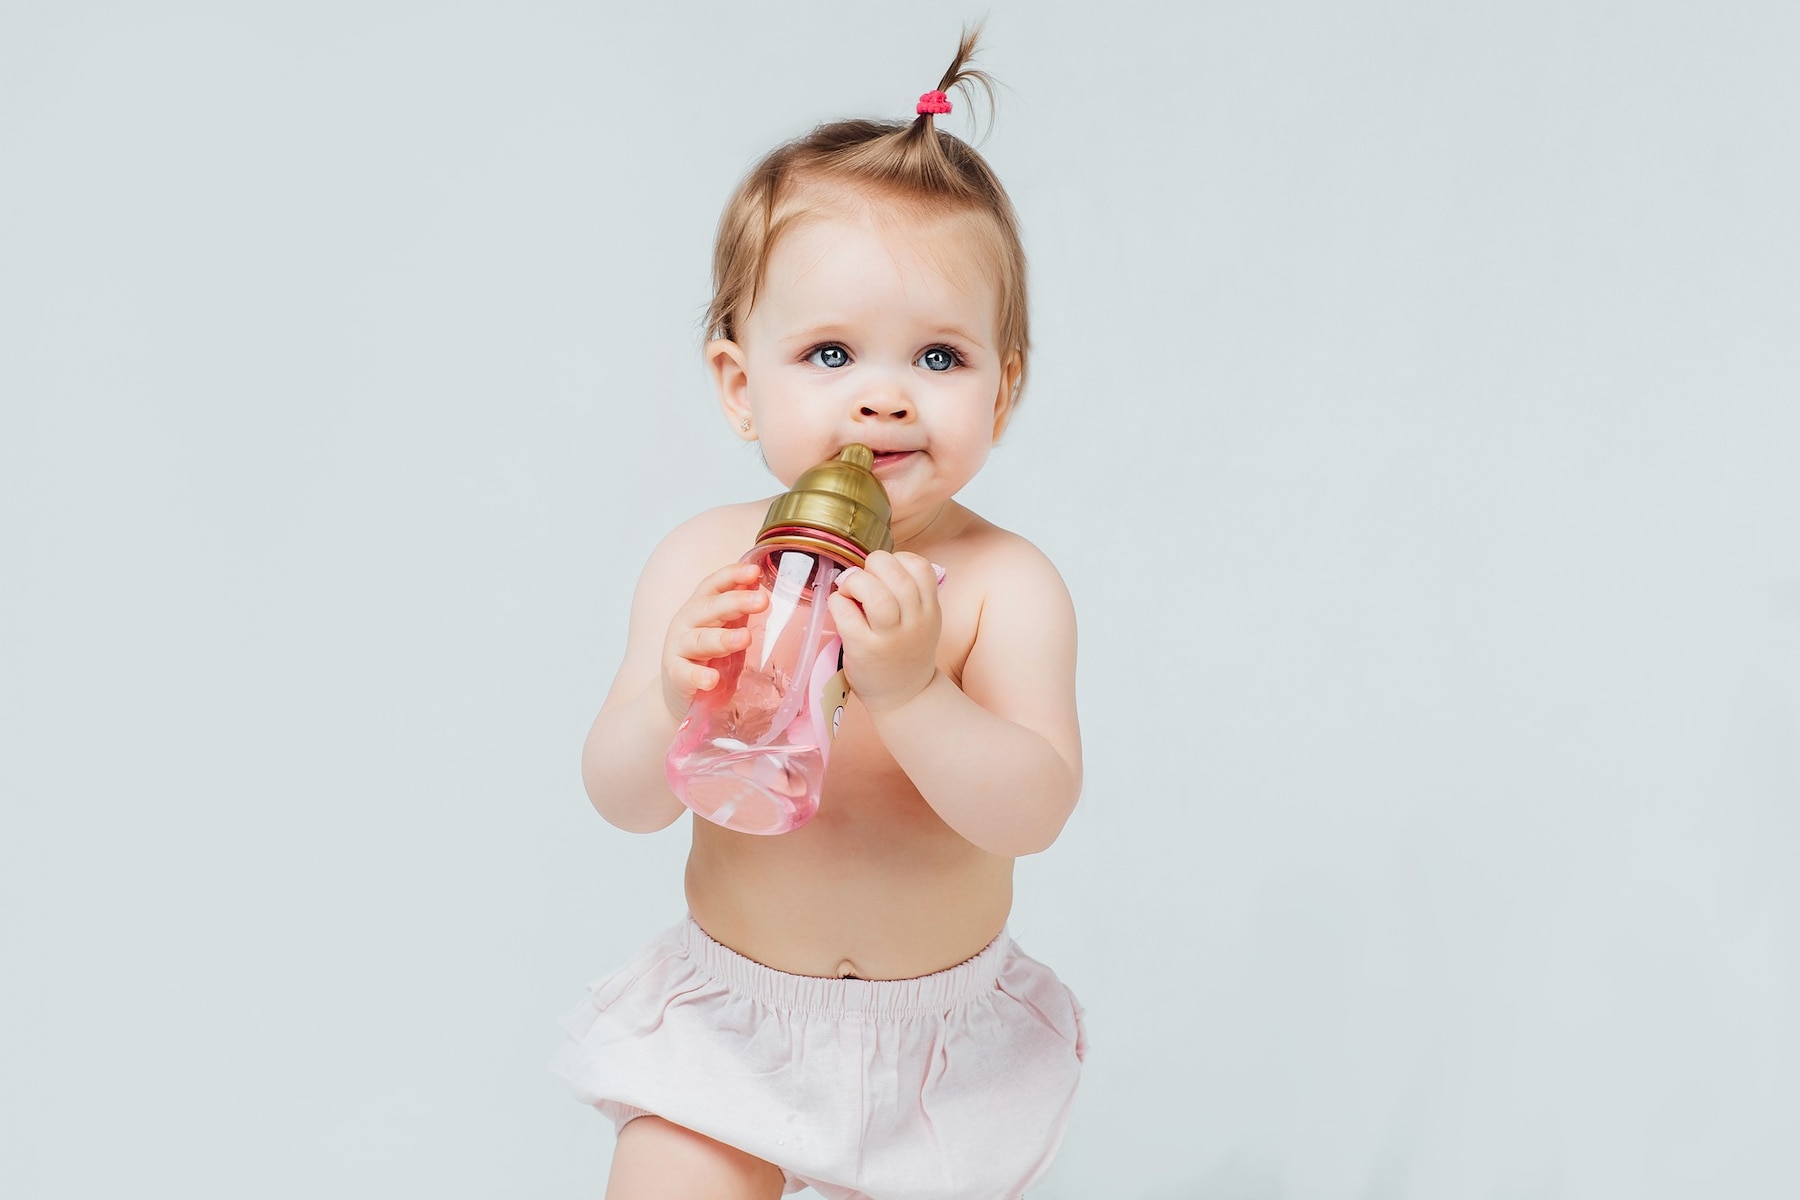 happy-girl-diaper-with-cute-hairstyle-holds-bottle-milk_496169-799 (1).jpg